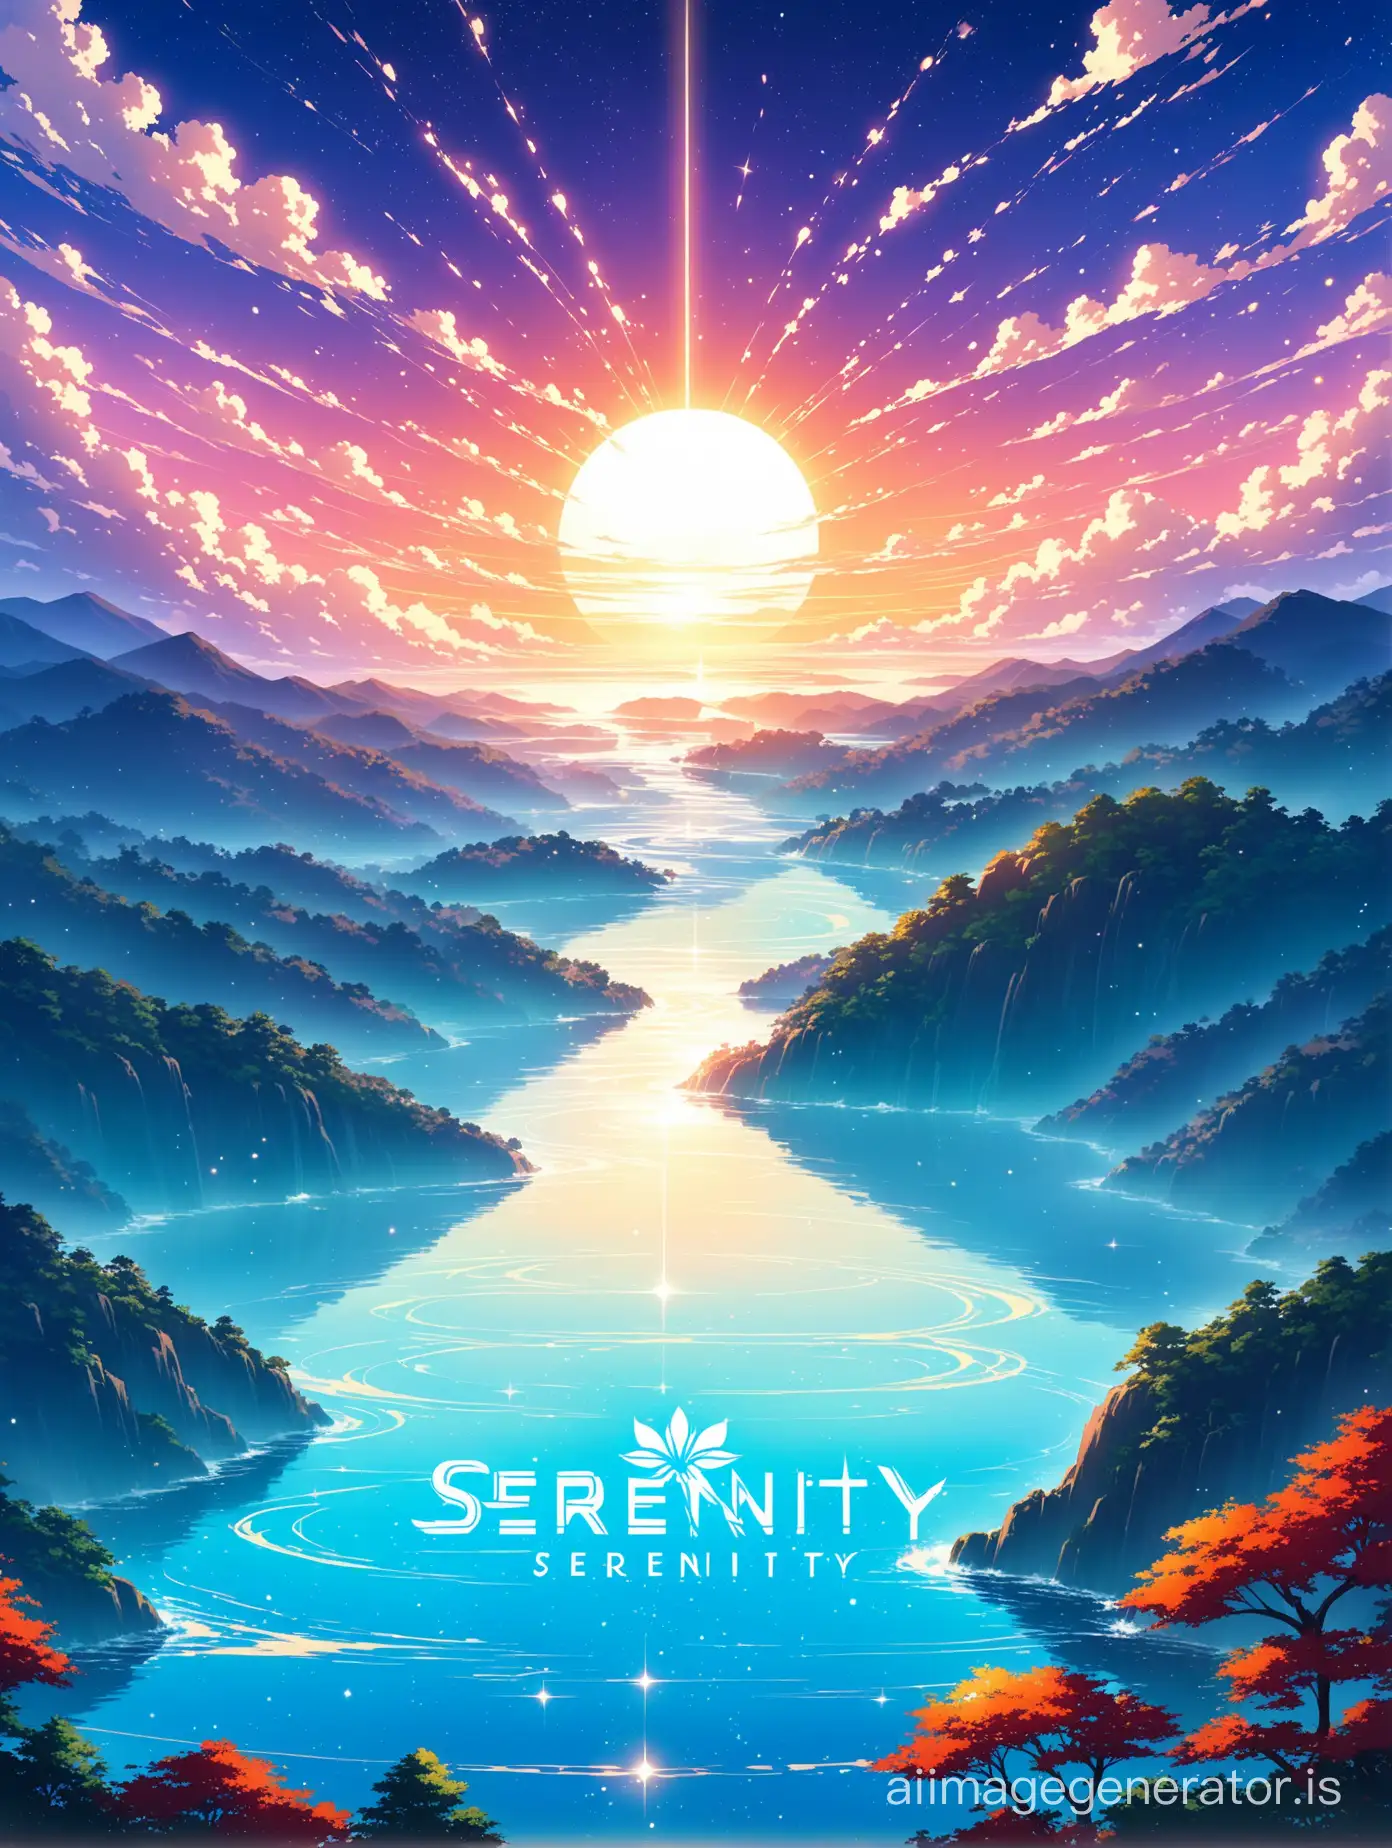 Create a captivating logo for 'Serenity,' an anime streaming website. Incorporate elements that evoke tranquility and elegance while capturing the vibrant energy and excitement of anime culture. Consider integrating serene landscapes, graceful motifs, and fluid typography to convey a sense of calmness and sophistication. The logo should resonate with anime enthusiasts, inviting them into a world of immersive entertainment and serenity.